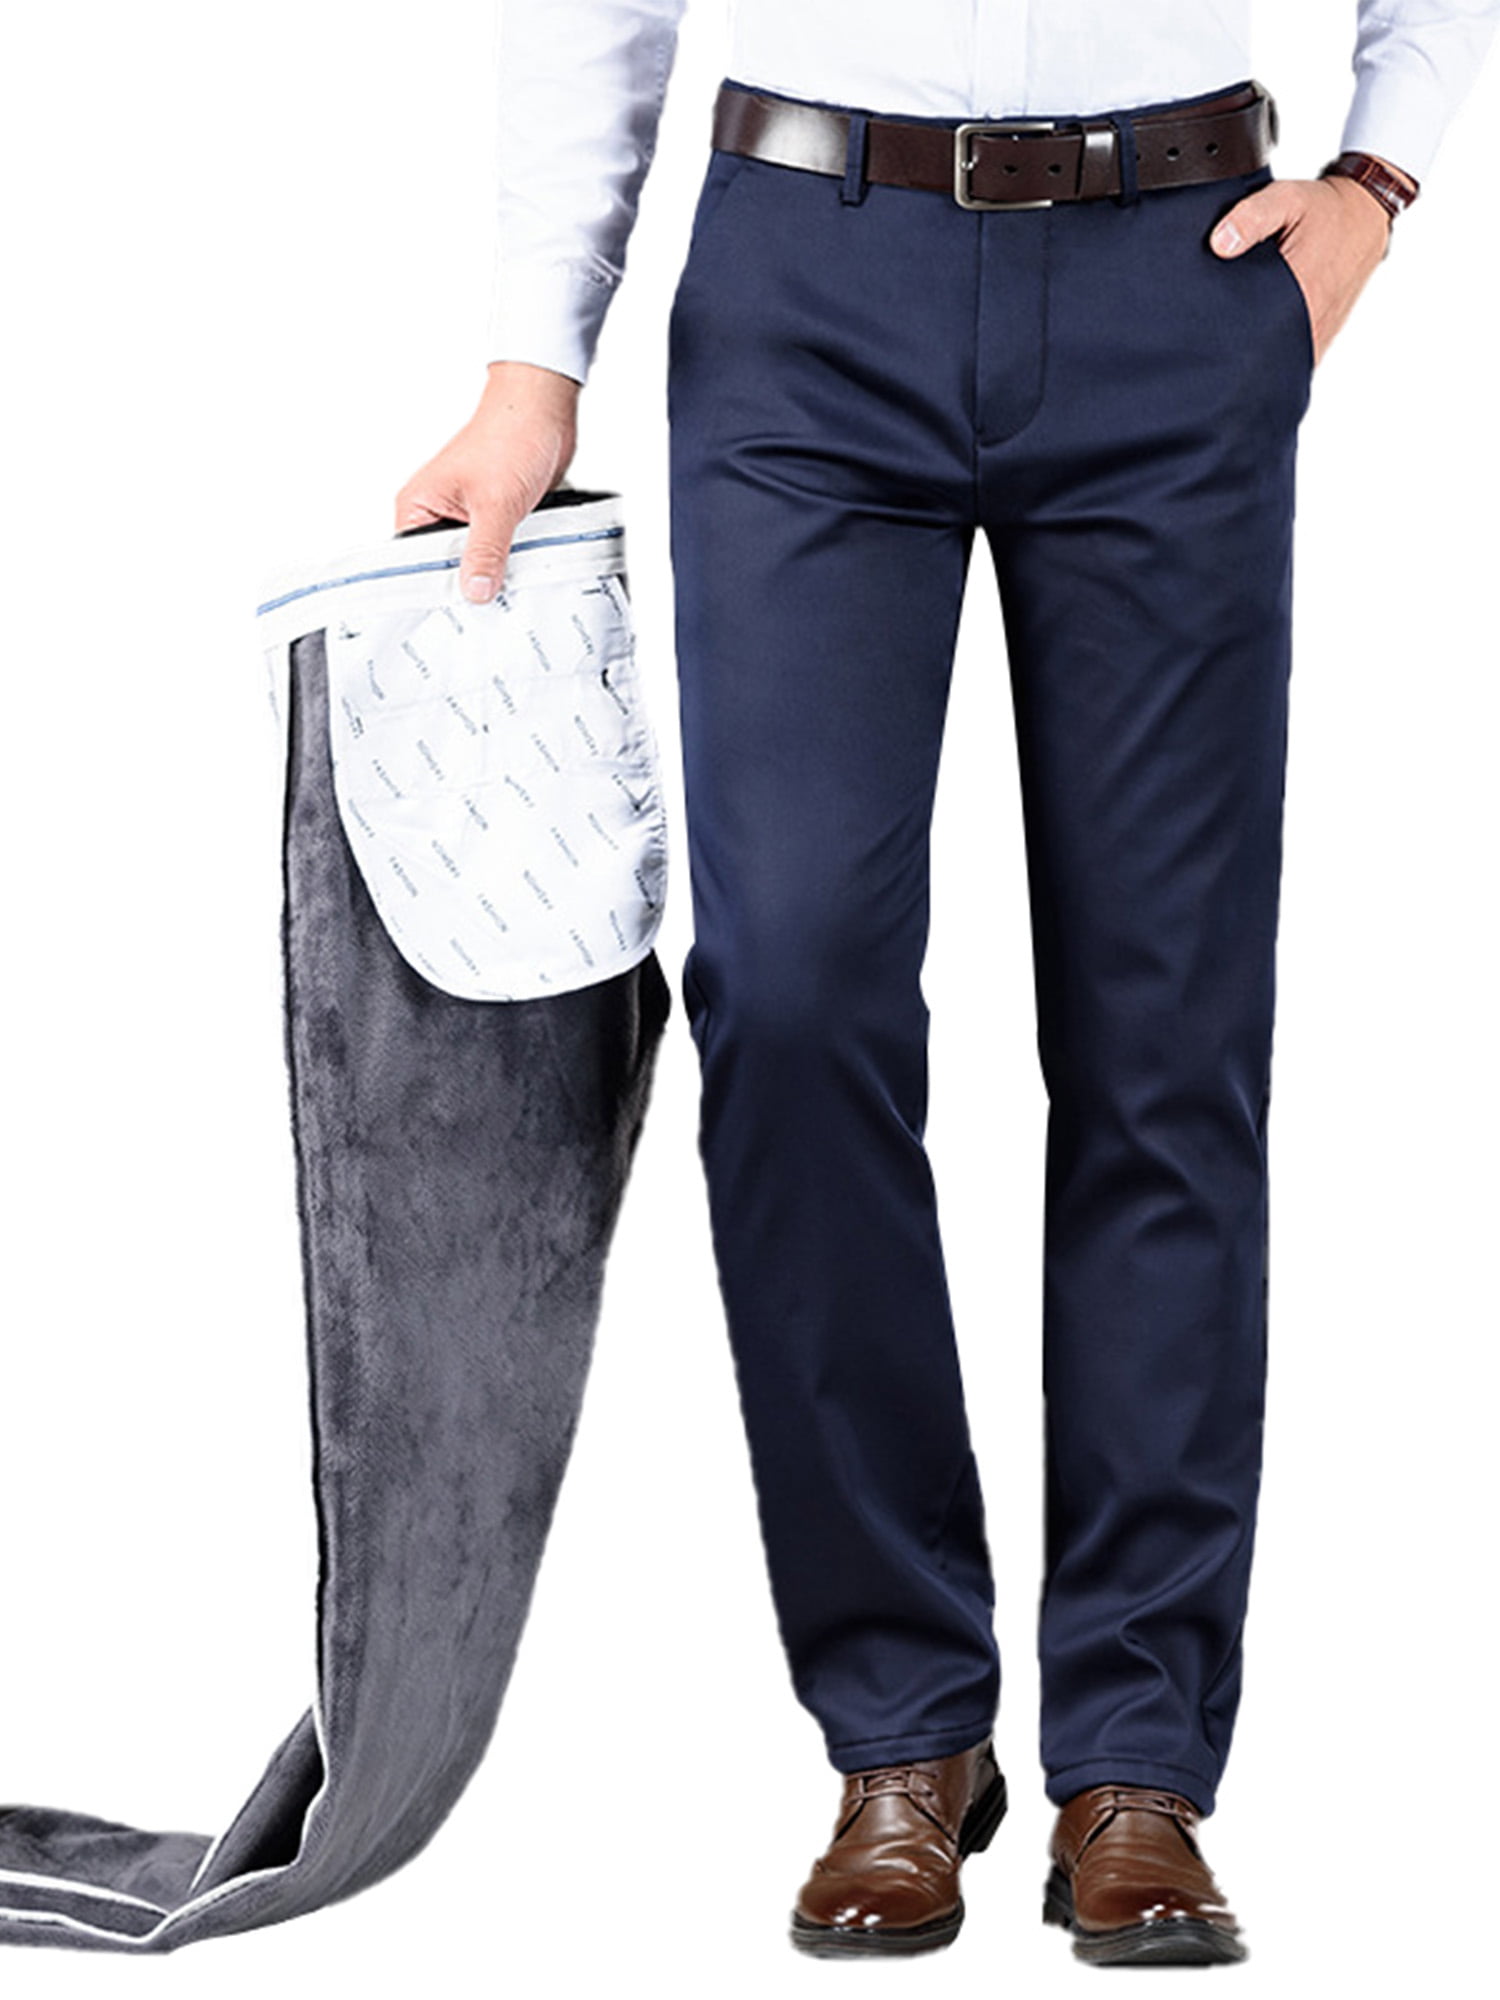 Twisted Tailor Ellroy Skinny Fit Navy Blue Suit Trousers